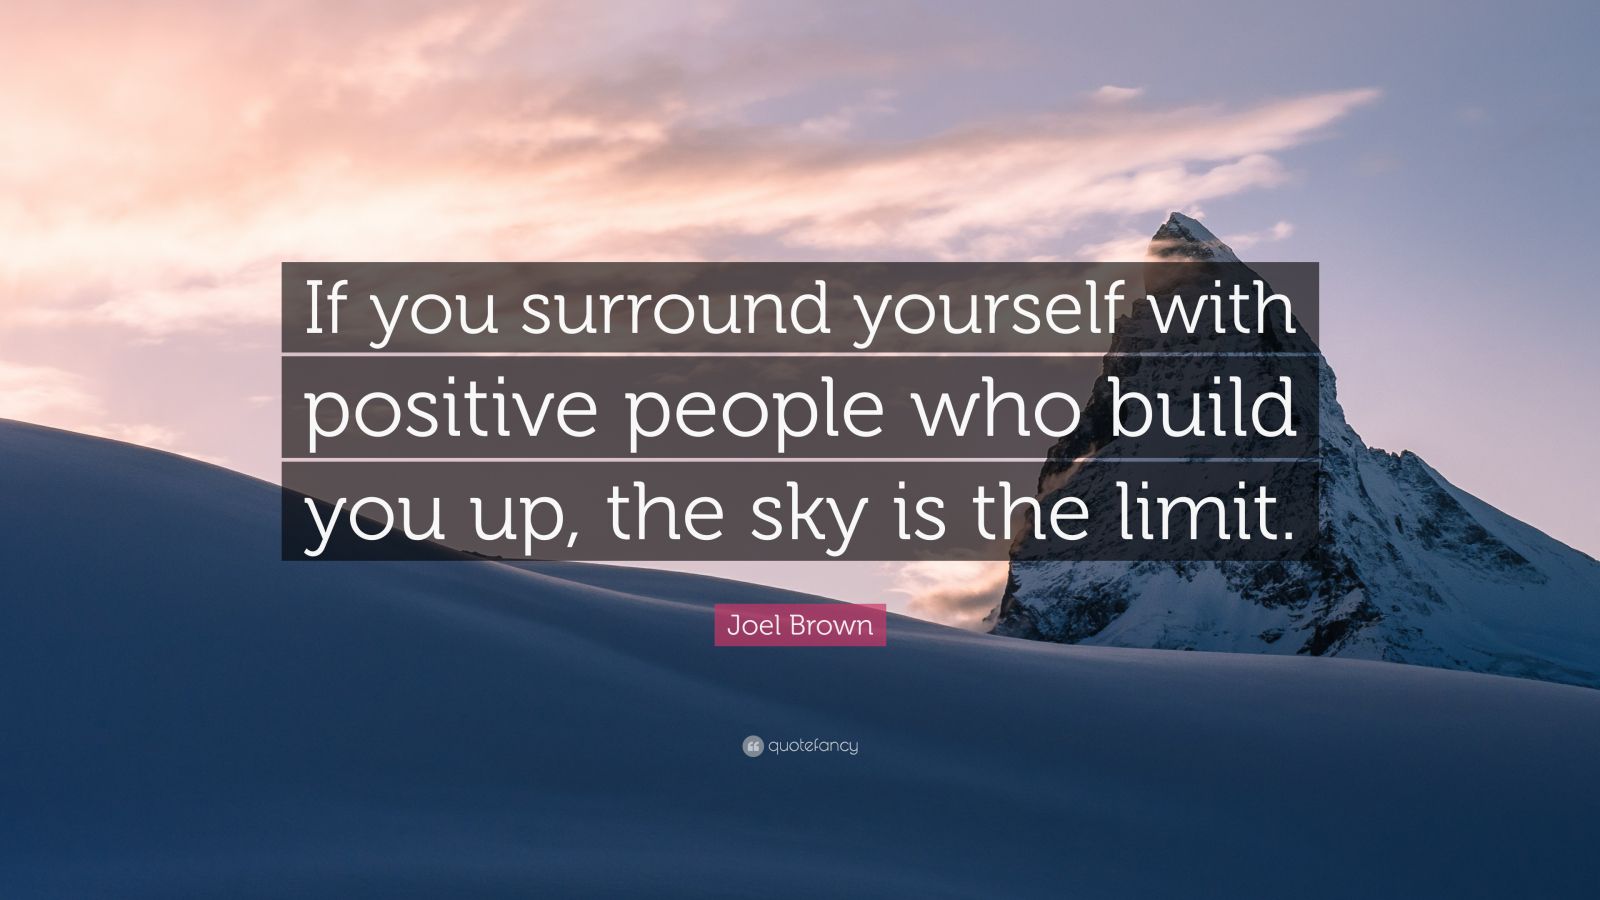 2791361 Joel Brown Quote If you surround yourself with positive people who